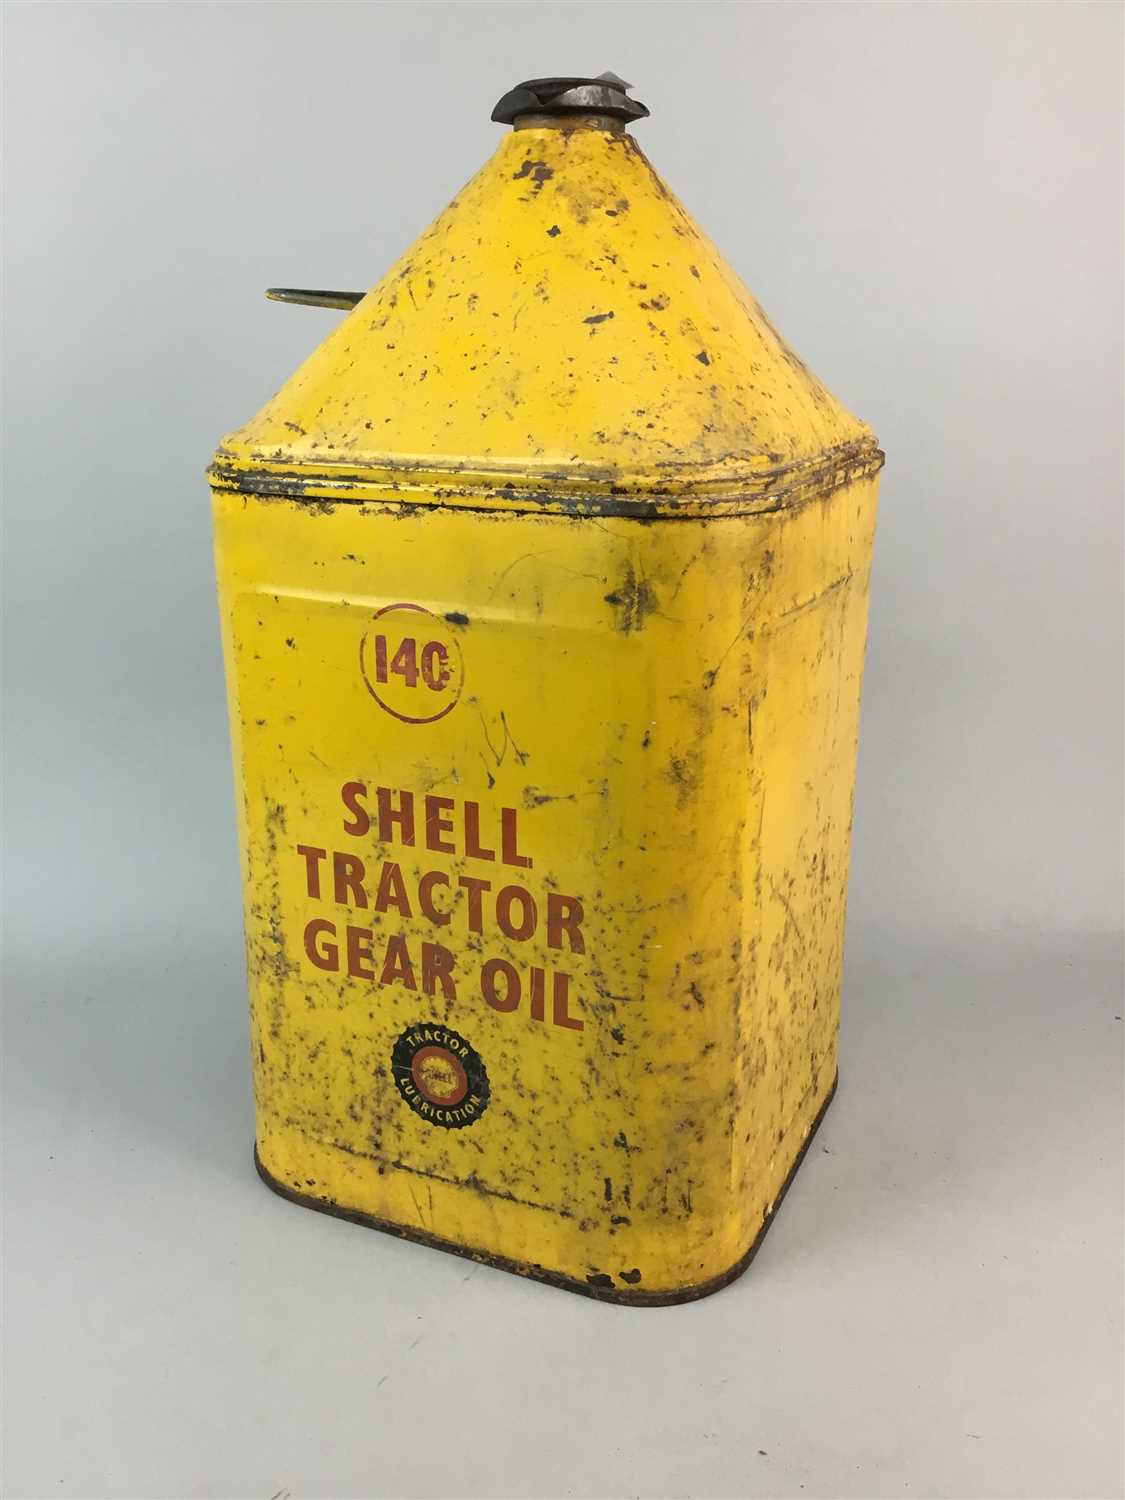 Lot 189 - A SHELL TRACTOR GEAR OIL CANNISTER